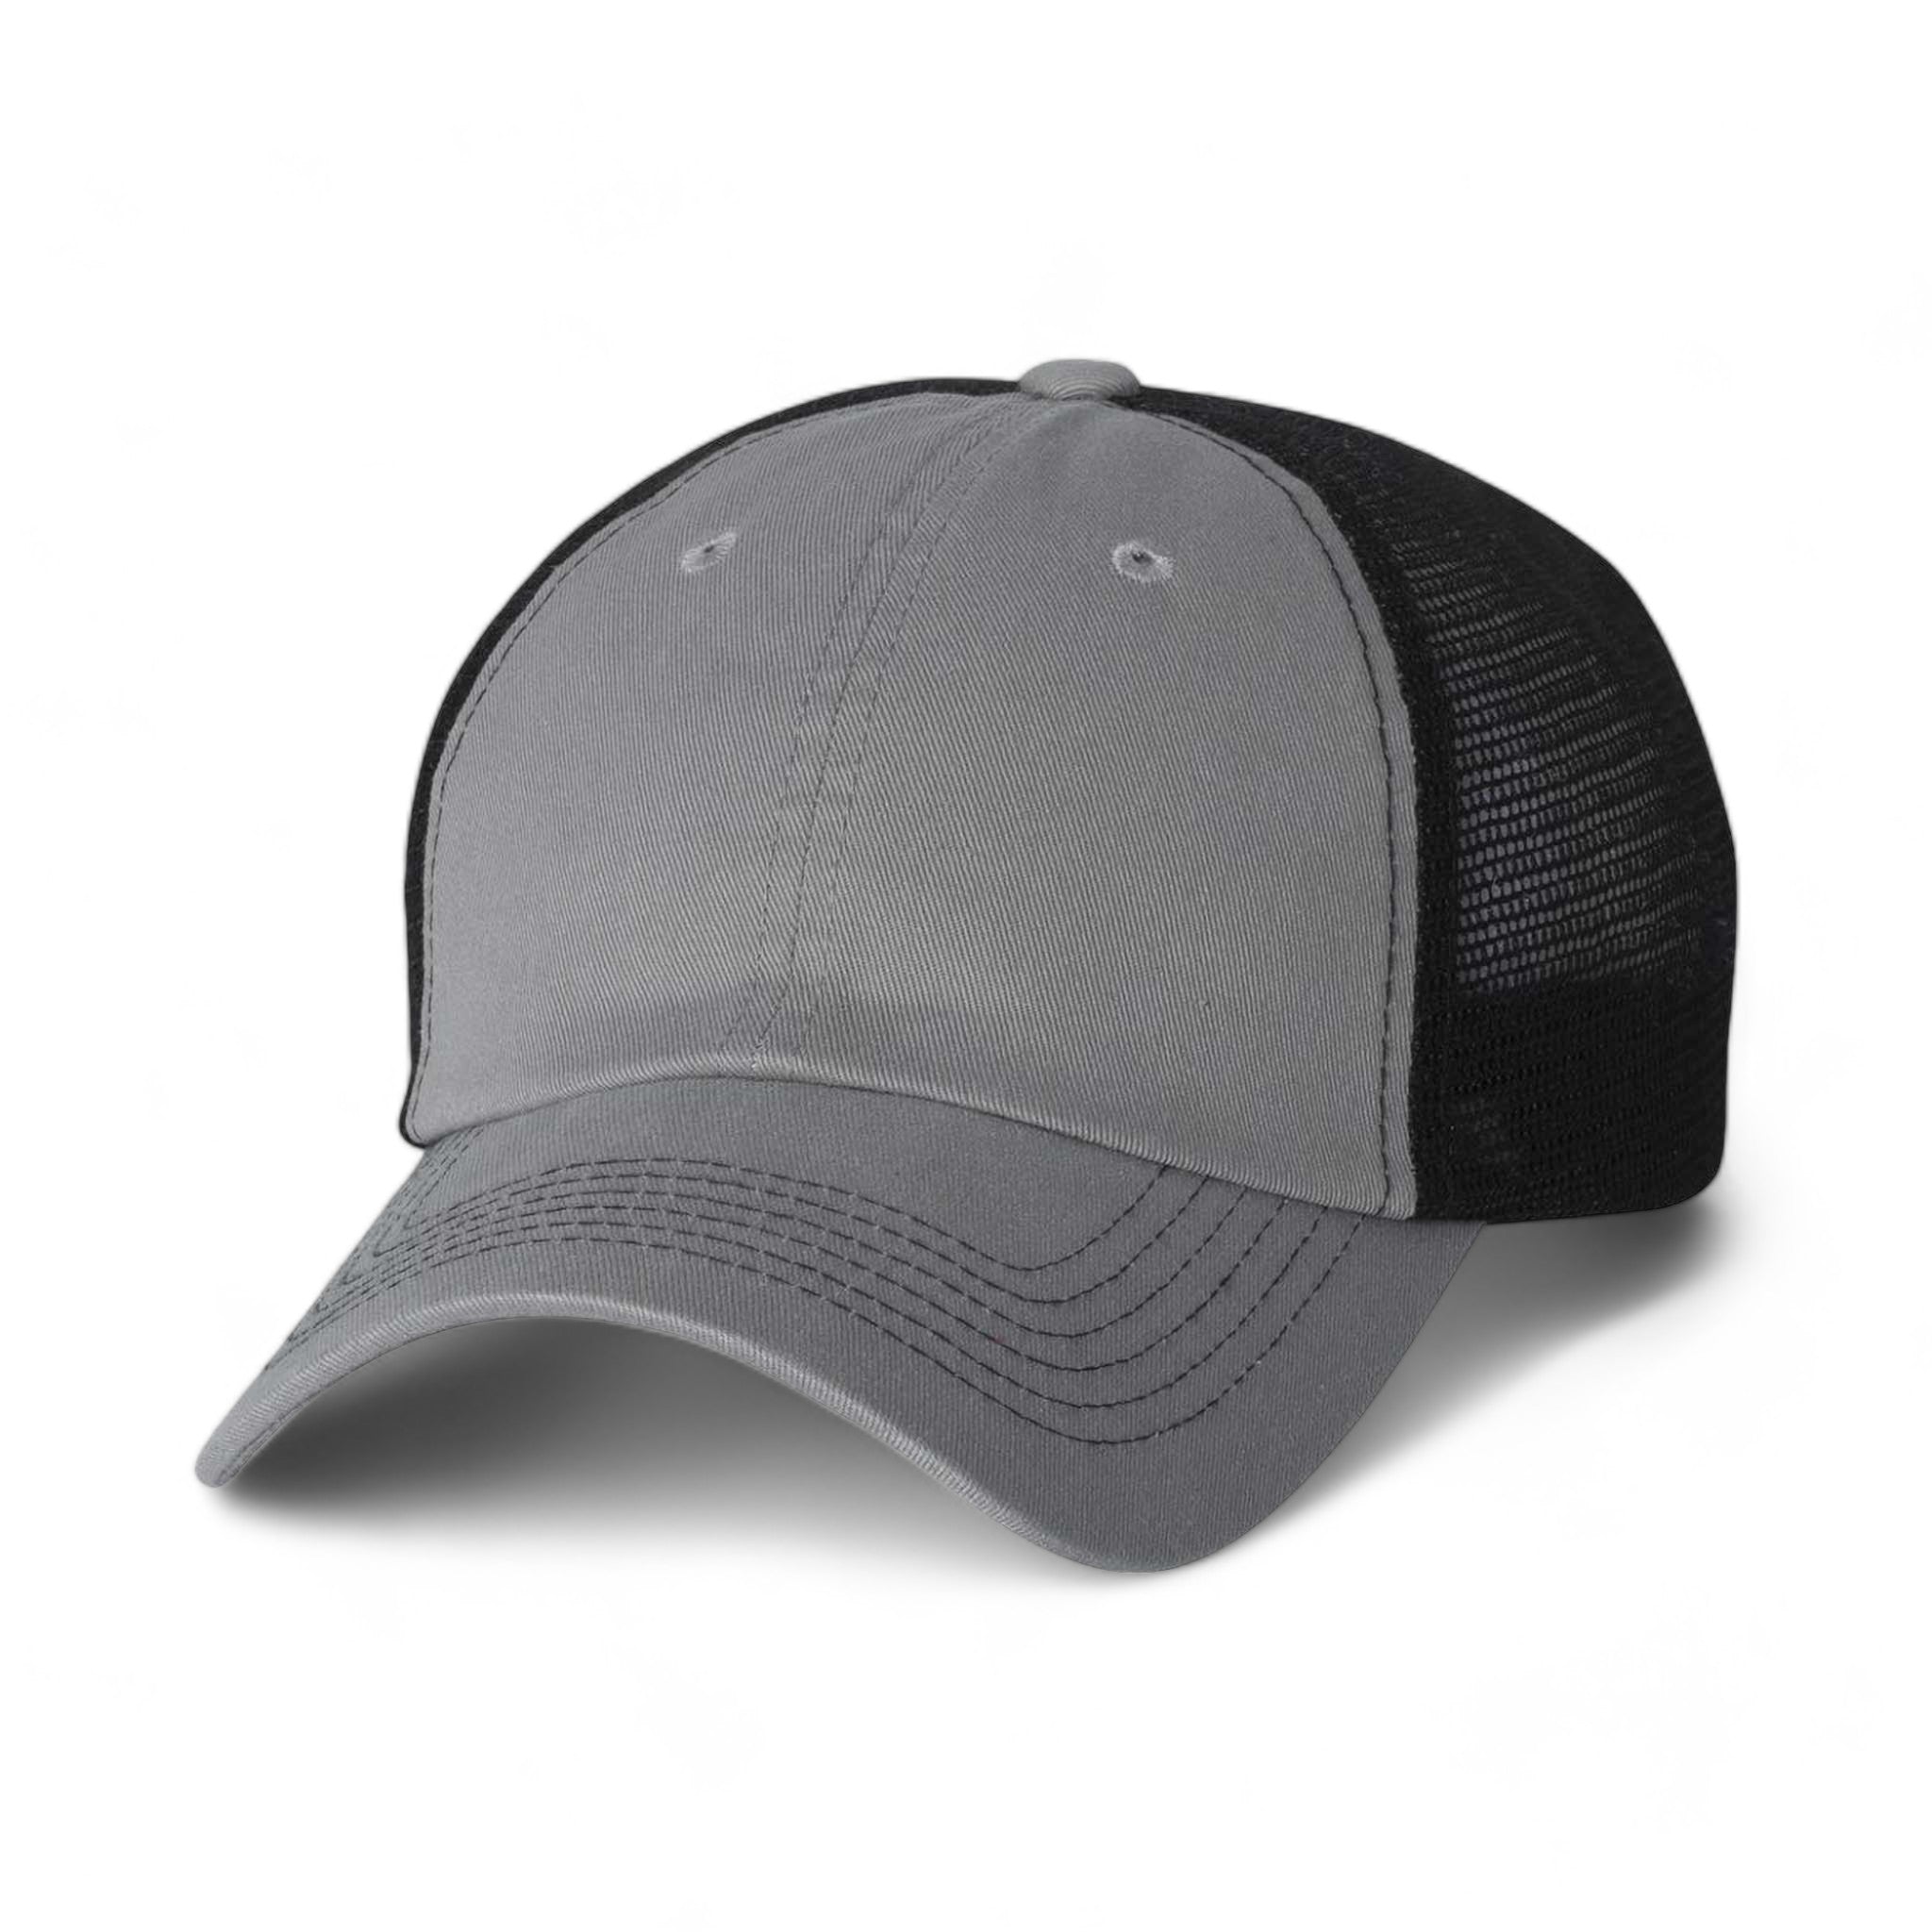 Front view of Sportsman 3100 custom hat in grey and black